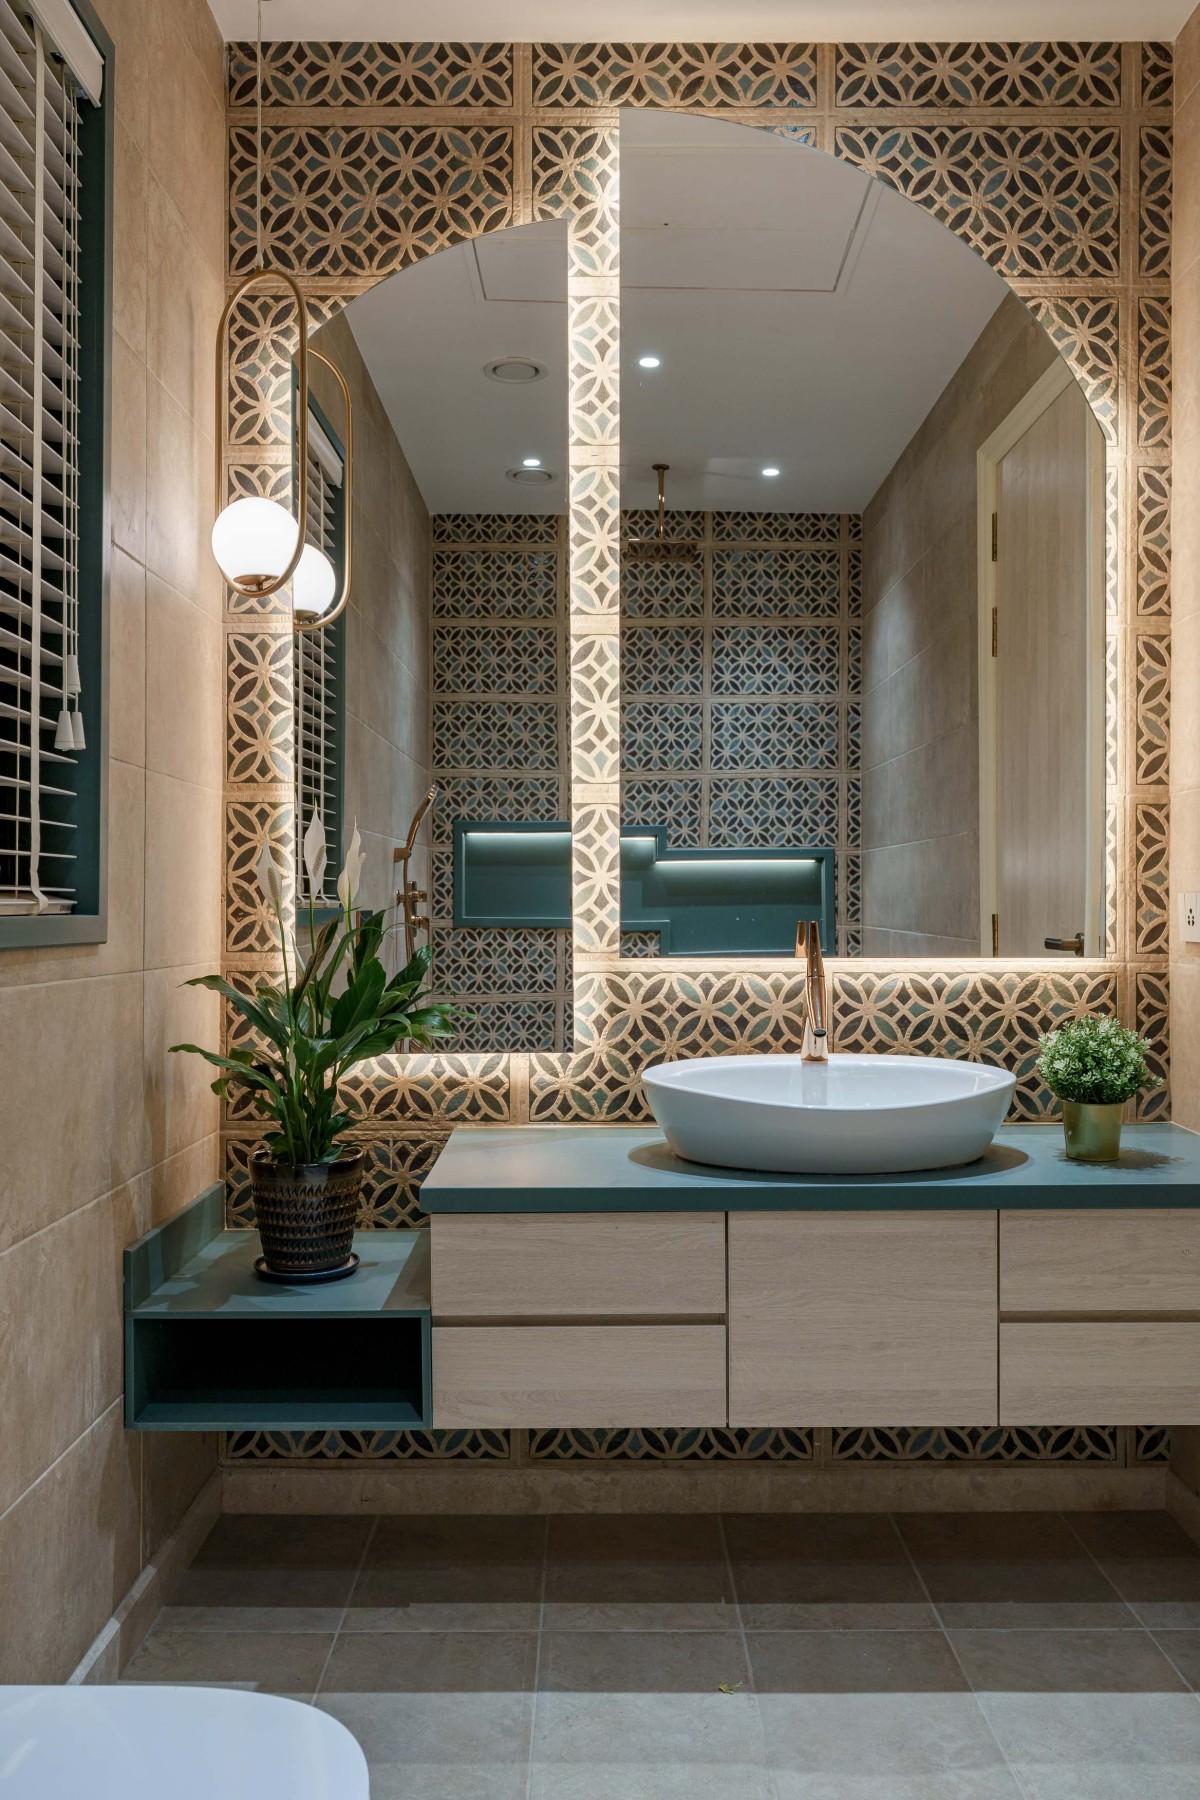 Toilet of Galada’s Residence by Centre for Design Excellence